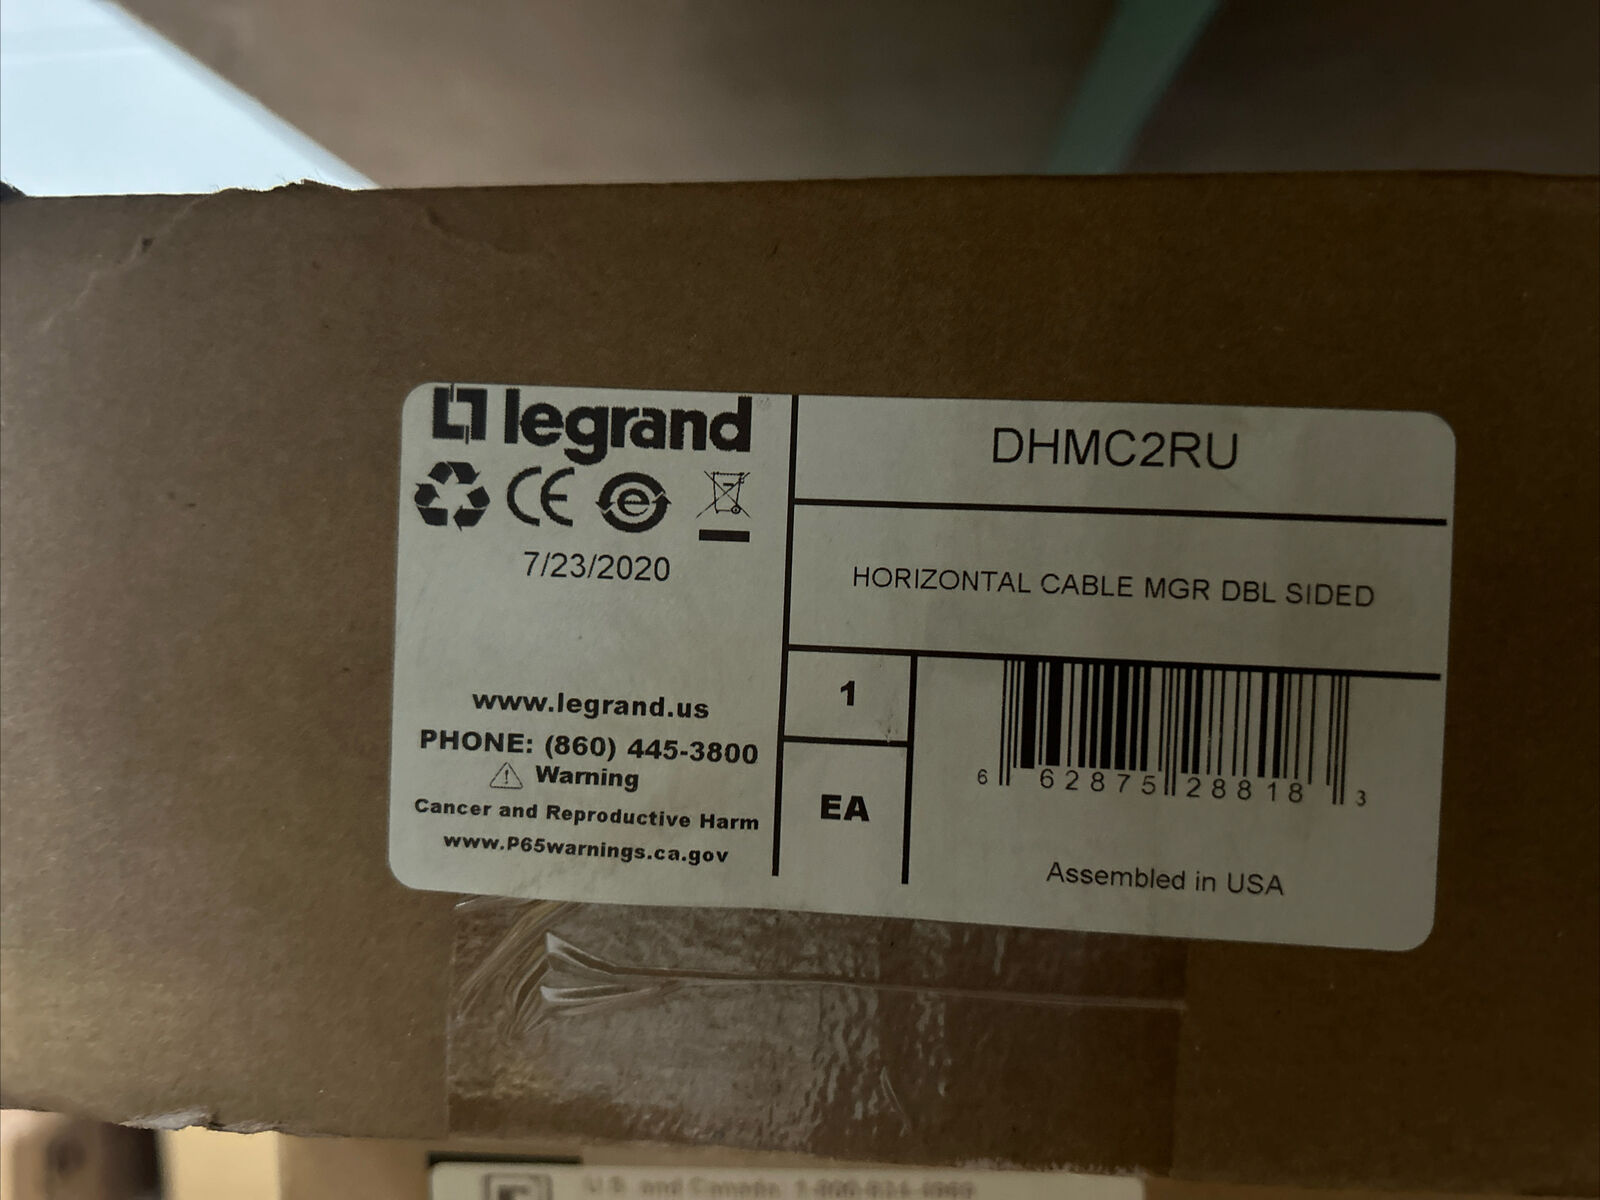 Legrand-Ortronics DHMC2RU Horizontal Cable Manager Double Sided